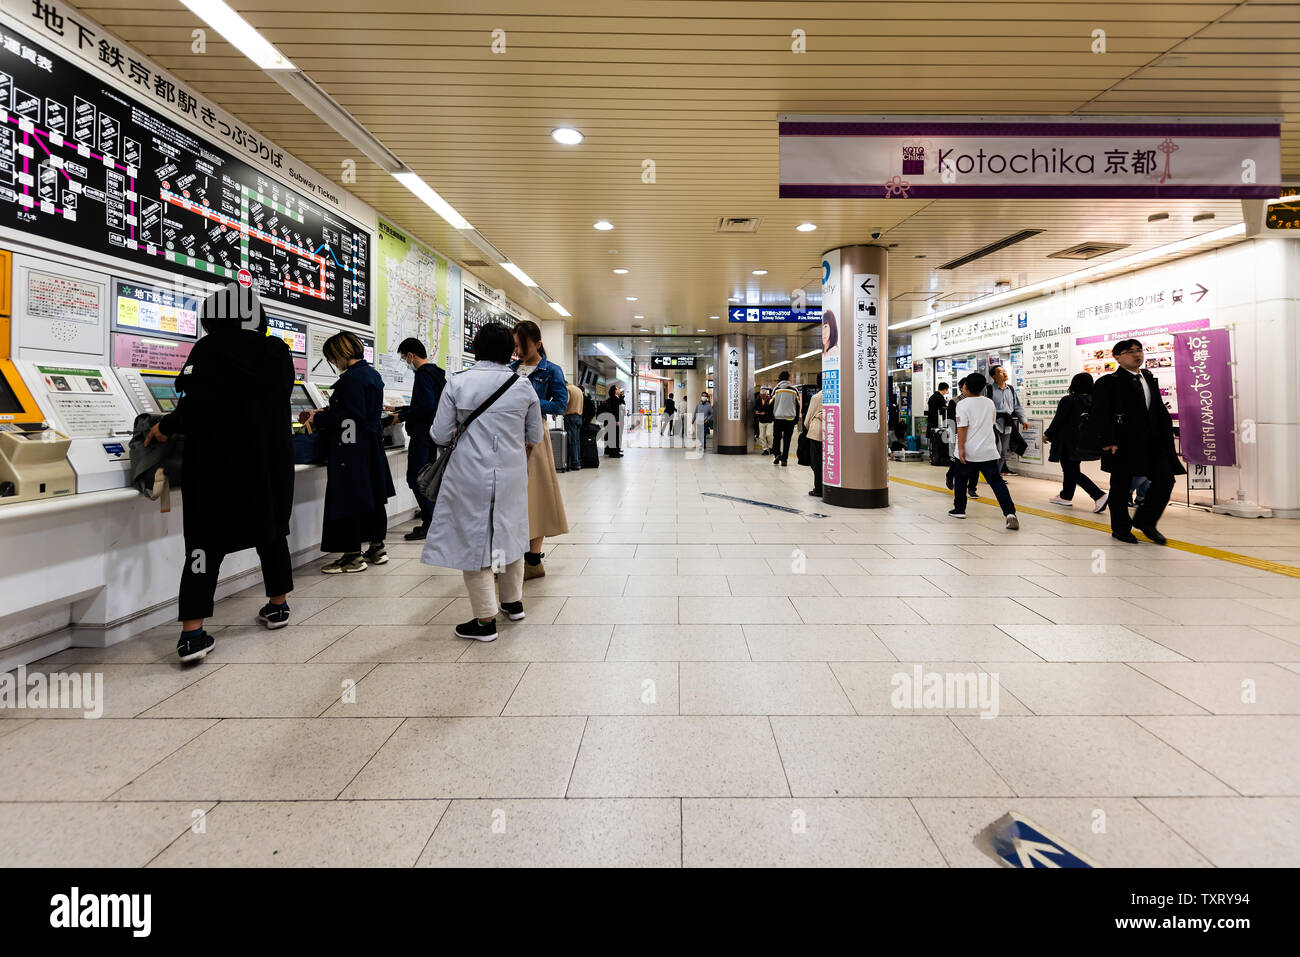 Kyoto, Japan - April 17, 2019: Inside interior of Kyoto Station indoors  undergound with people busy walking buying tickets and english sign for  kotoch Stock Photo - Alamy